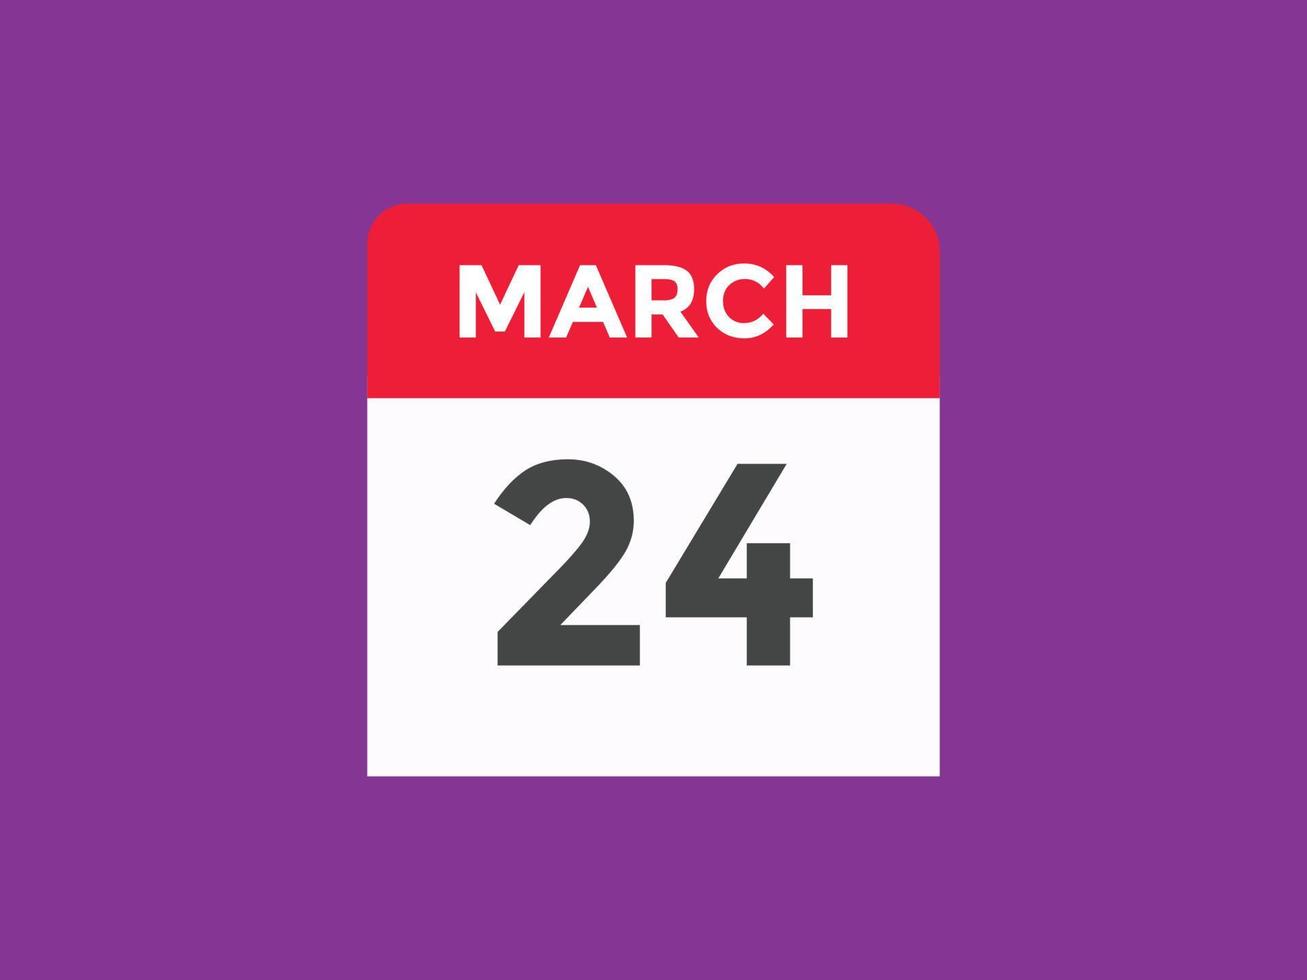 march 24 calendar reminder. 24th march daily calendar icon template. Calendar 24th march icon Design template. Vector illustration